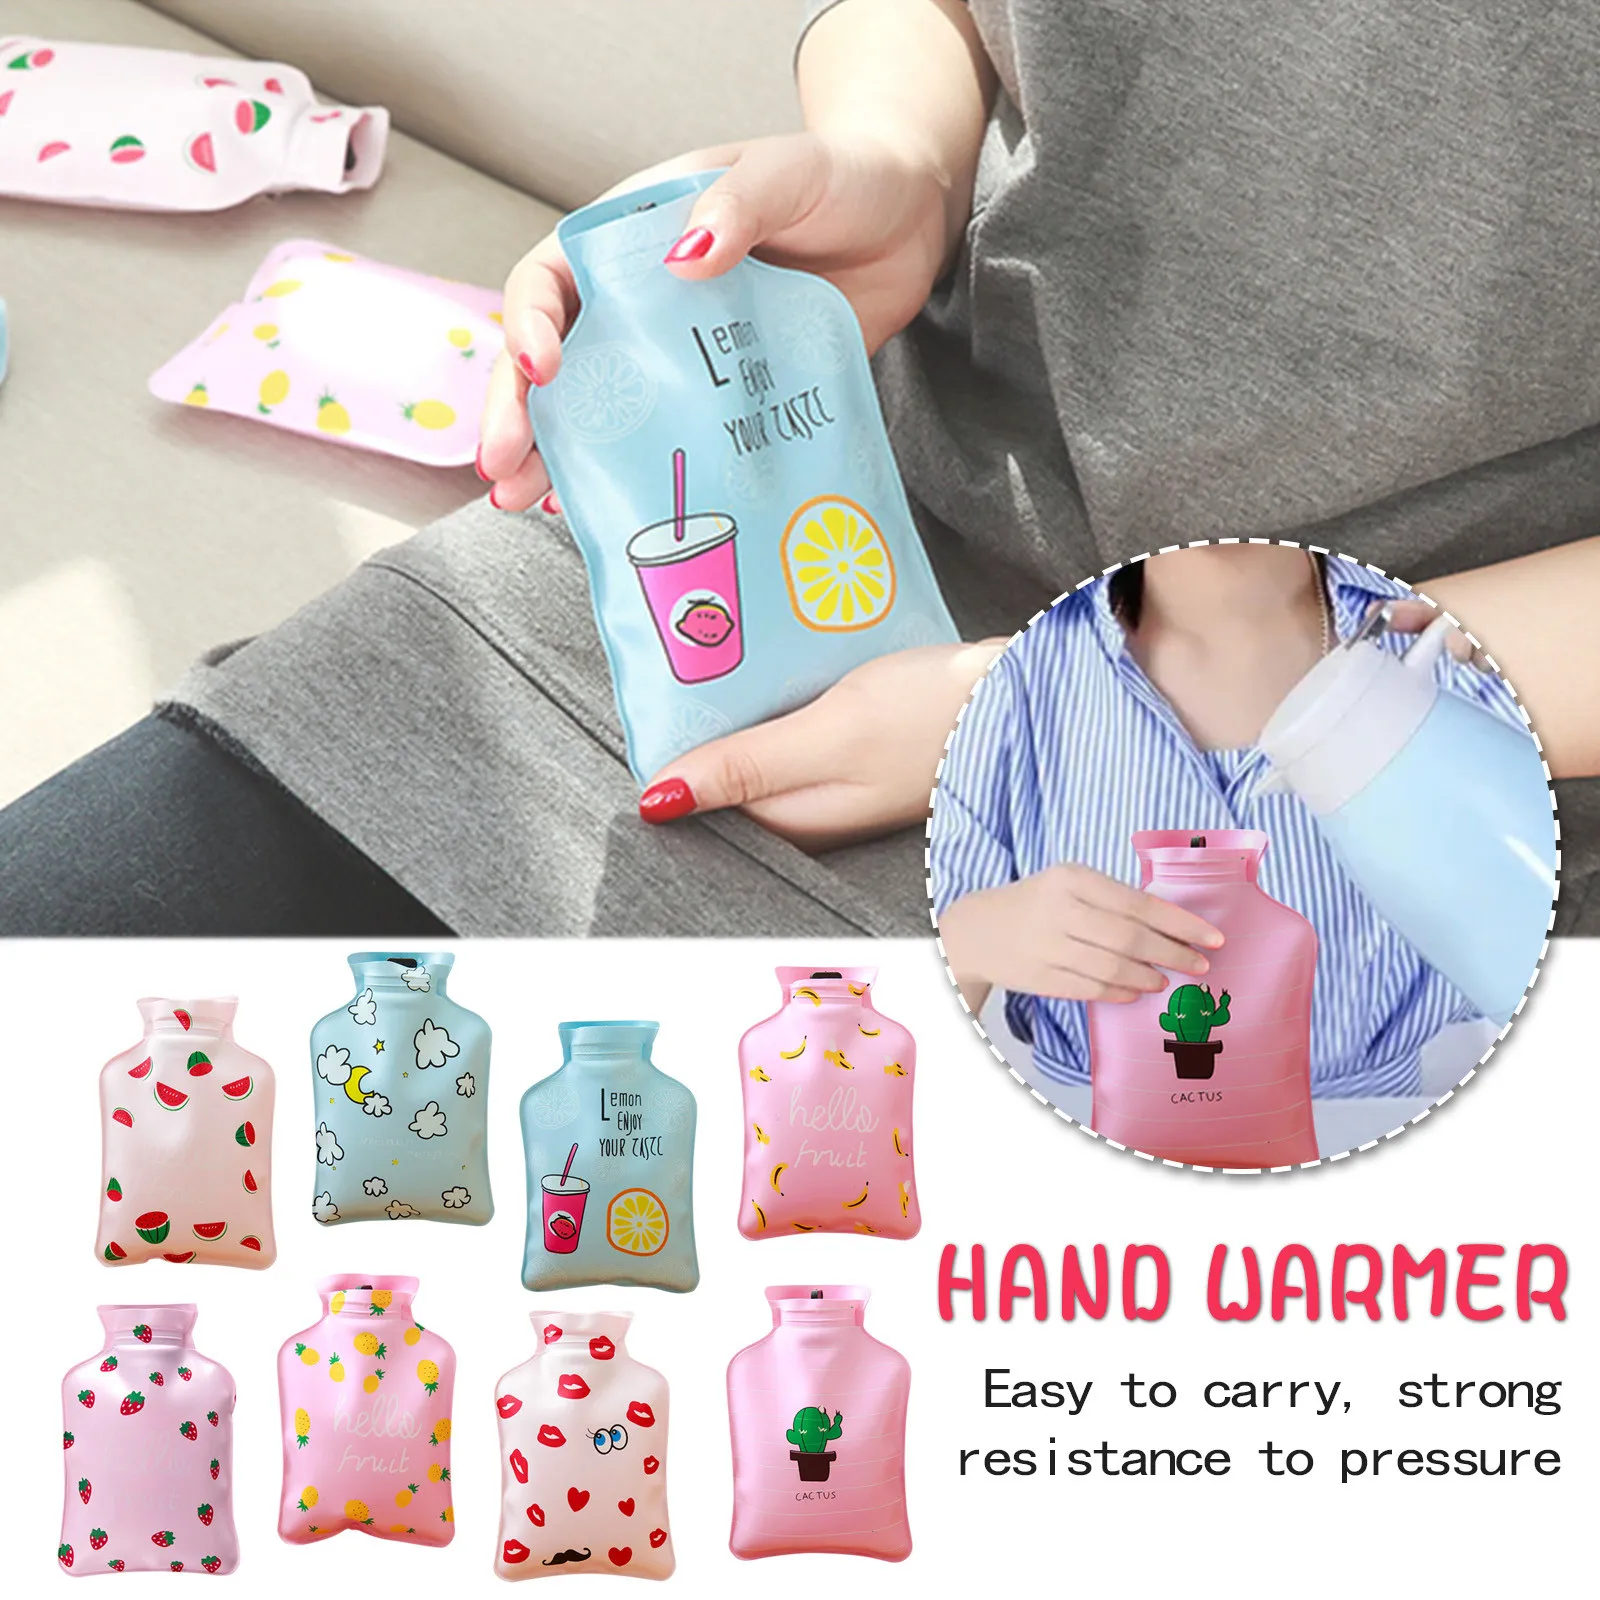 Hand Warmer With Hot Pack Hot Water Bottle Shaped 21099c 